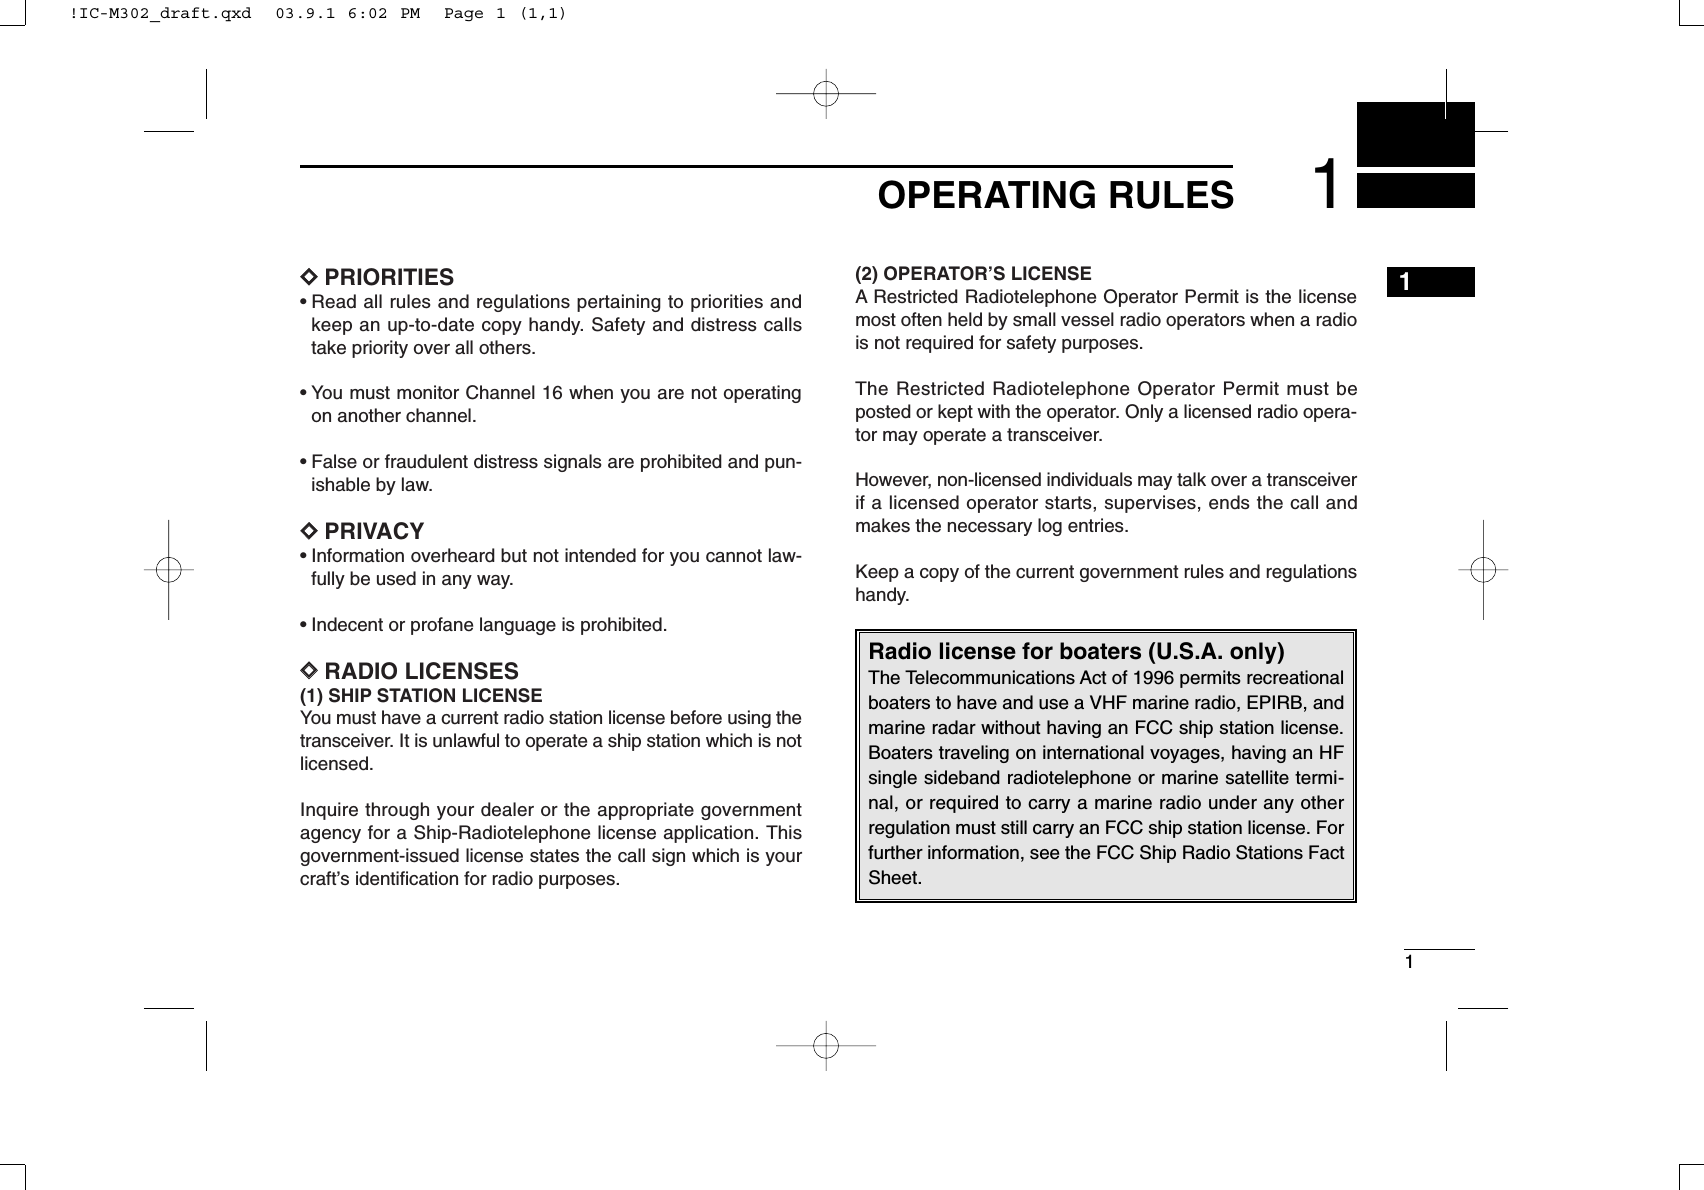 11OPERATING RULES1DDPRIORITIES• Read all rules and regulations pertaining to priorities andkeep an up-to-date copy handy. Safety and distress callstake priority over all others.• You must monitor Channel 16 when you are not operatingon another channel.• False or fraudulent distress signals are prohibited and pun-ishable by law.DDPRIVACY• Information overheard but not intended for you cannot law-fully be used in any way.• Indecent or profane language is prohibited.DDRADIO LICENSES(1) SHIP STATION LICENSEYou must have a current radio station license before using thetransceiver. It is unlawful to operate a ship station which is notlicensed.Inquire through your dealer or the appropriate governmentagency for a Ship-Radiotelephone license application. Thisgovernment-issued license states the call sign which is yourcraft’s identiﬁcation for radio purposes.(2) OPERATOR’S LICENSEA Restricted Radiotelephone Operator Permit is the licensemost often held by small vessel radio operators when a radiois not required for safety purposes.The Restricted Radiotelephone Operator Permit must beposted or kept with the operator. Only a licensed radio opera-tor may operate a transceiver.However, non-licensed individuals may talk over a transceiverif a licensed operator starts, supervises, ends the call andmakes the necessary log entries.Keep a copy of the current government rules and regulationshandy.Radio license for boaters (U.S.A. only)The Telecommunications Act of 1996 permits recreationalboaters to have and use a VHF marine radio, EPIRB, andmarine radar without having an FCC ship station license.Boaters traveling on international voyages, having an HFsingle sideband radiotelephone or marine satellite termi-nal, or required to carry a marine radio under any otherregulation must still carry an FCC ship station license. Forfurther information, see the FCC Ship Radio Stations FactSheet.!IC-M302_draft.qxd  03.9.1 6:02 PM  Page 1 (1,1)